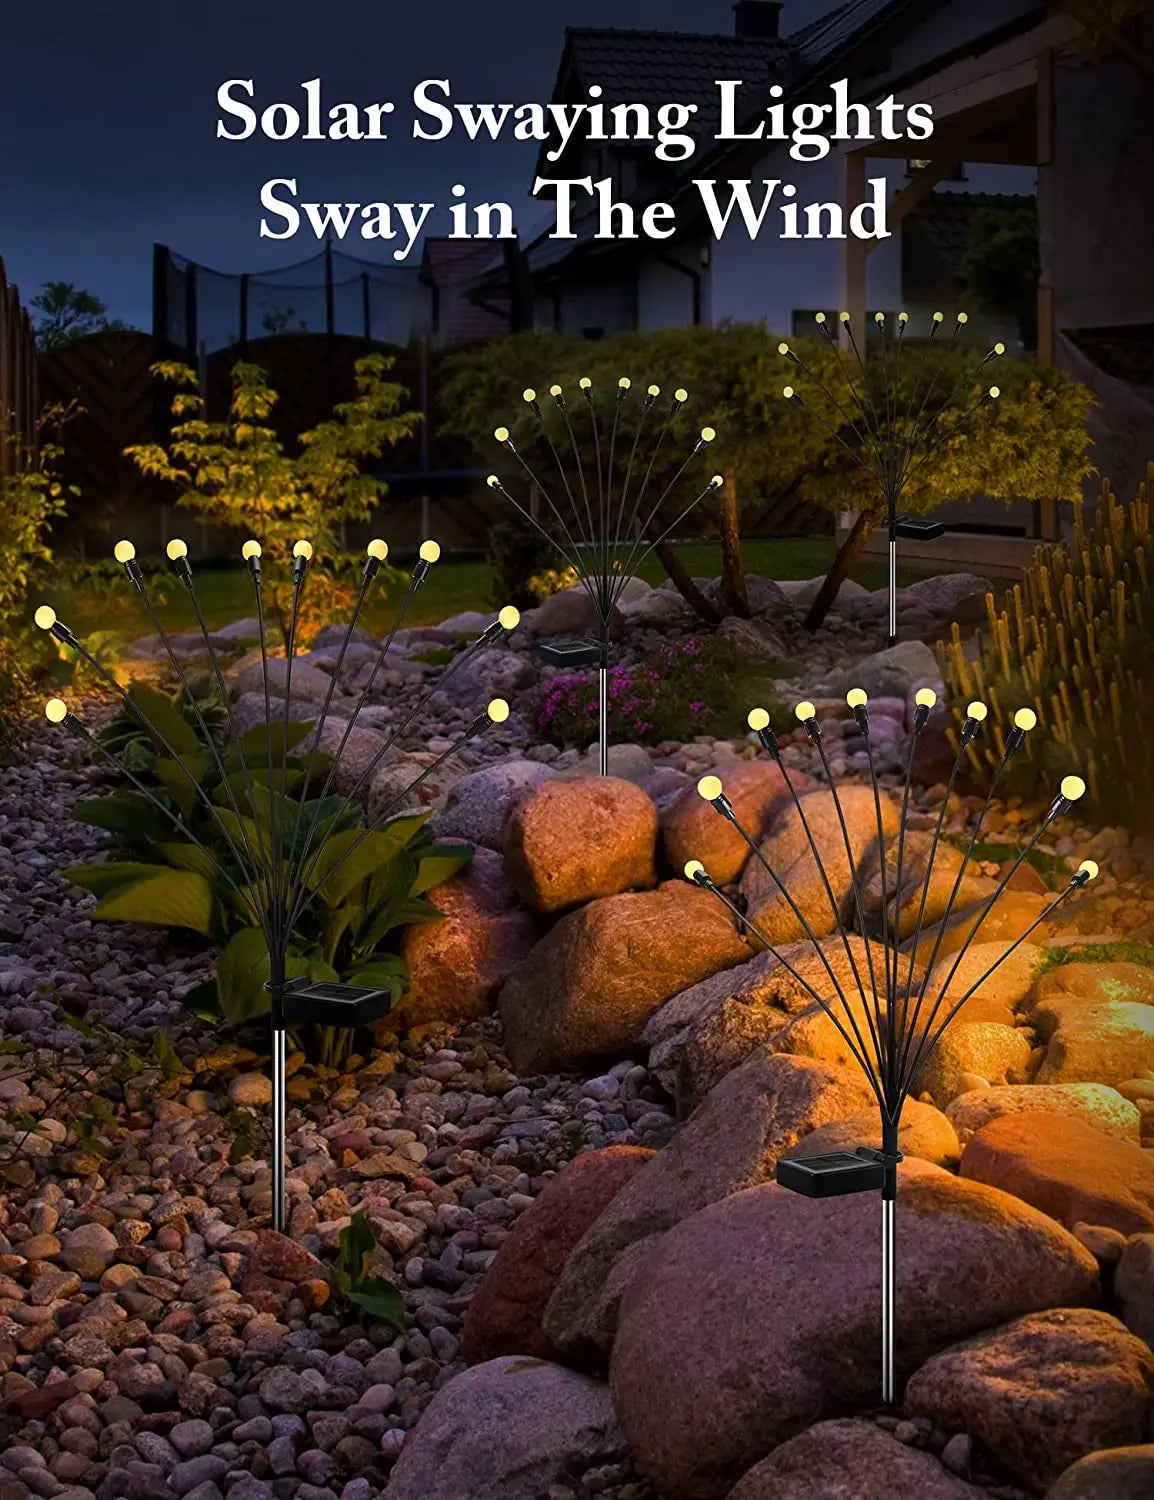 8Pack Solar Firefly Light, Solar-powered lights gently sway with the breeze, adding ambiance to your outdoor space.